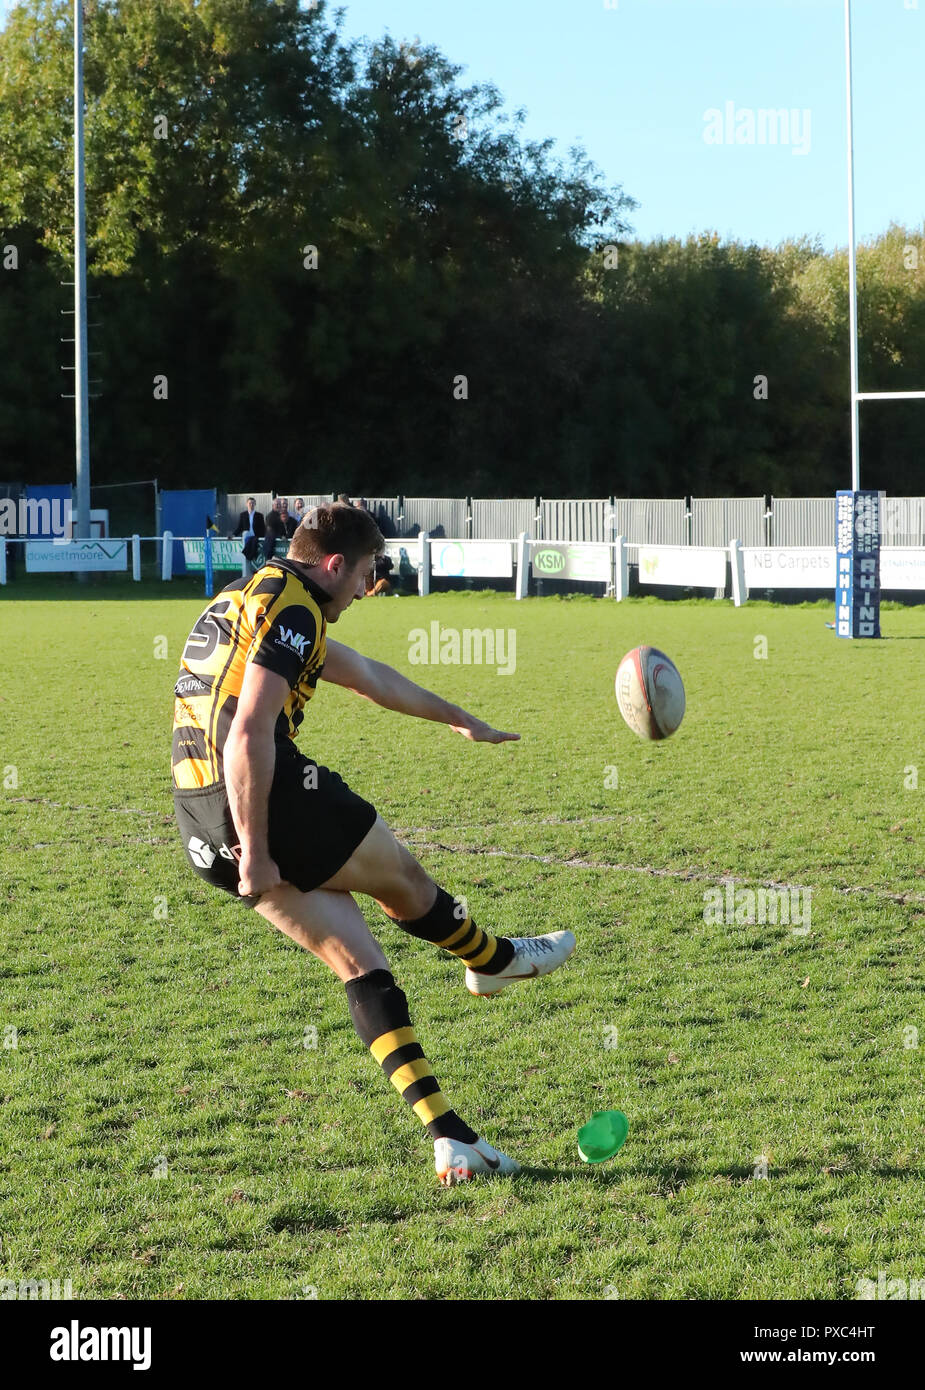 20.10.2018 Hinckley, Leicester, England. Rugby Union, Hinckley rfc v Fylde rfc.    Joe Wilson kicks a penalty for Hinckley during the RFU National League 2 North (NL2N) game played at the Leicester  Road Stadium.    © Phil Hutchinson / Alamy Live News Stock Photo